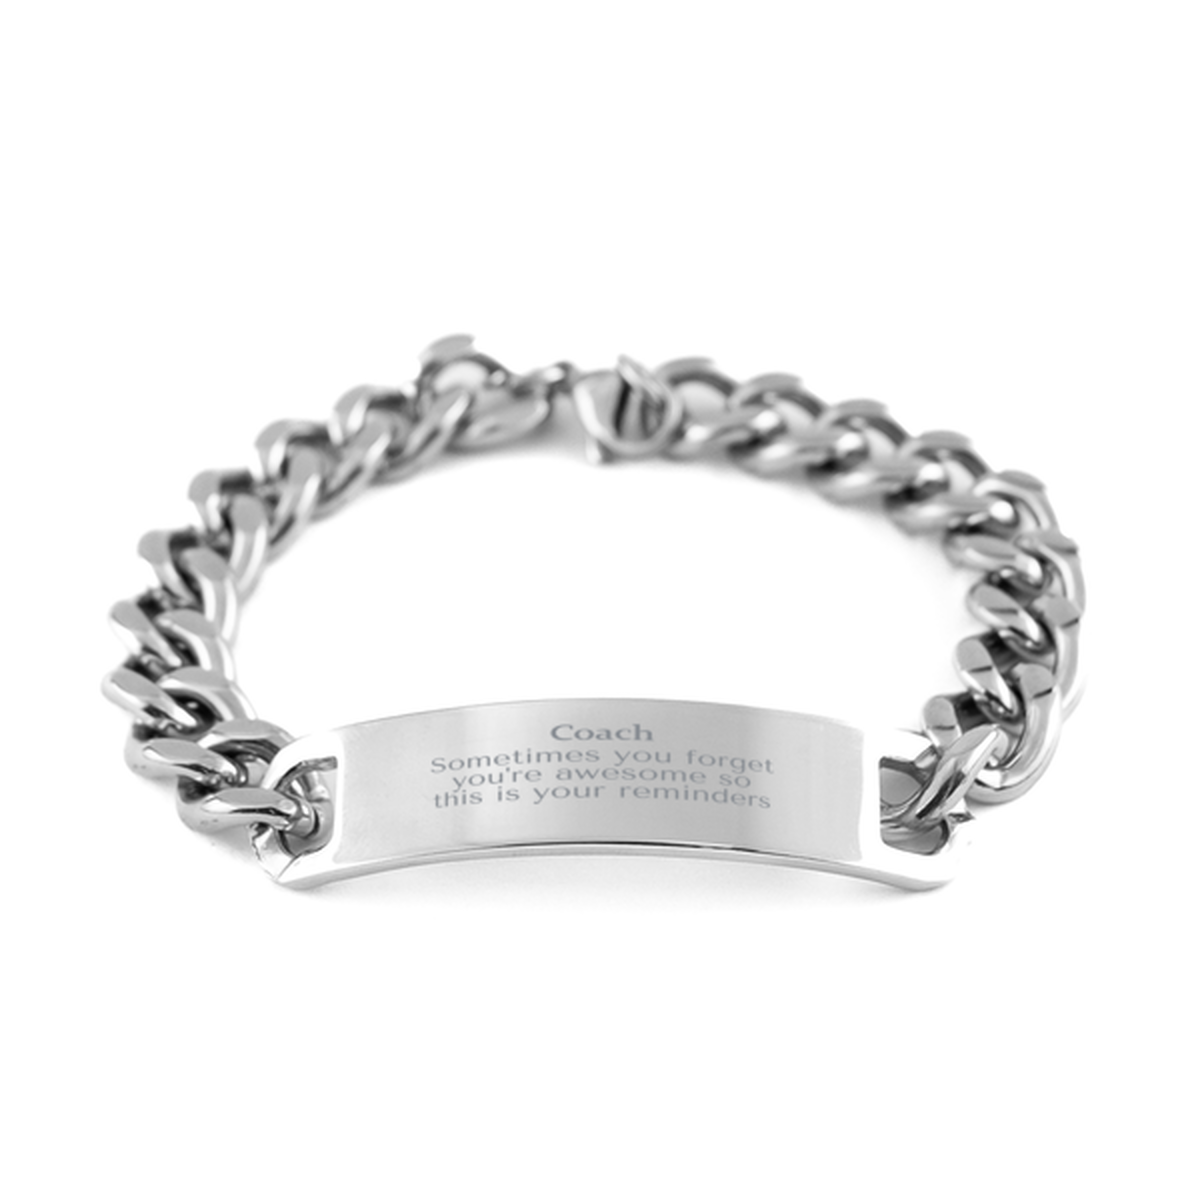 Sentimental Coach Cuban Chain Stainless Steel Bracelet, Coach Sometimes you forget you're awesome so this is your reminders, Graduation Christmas Birthday Gifts for Coach, Men, Women, Coworkers